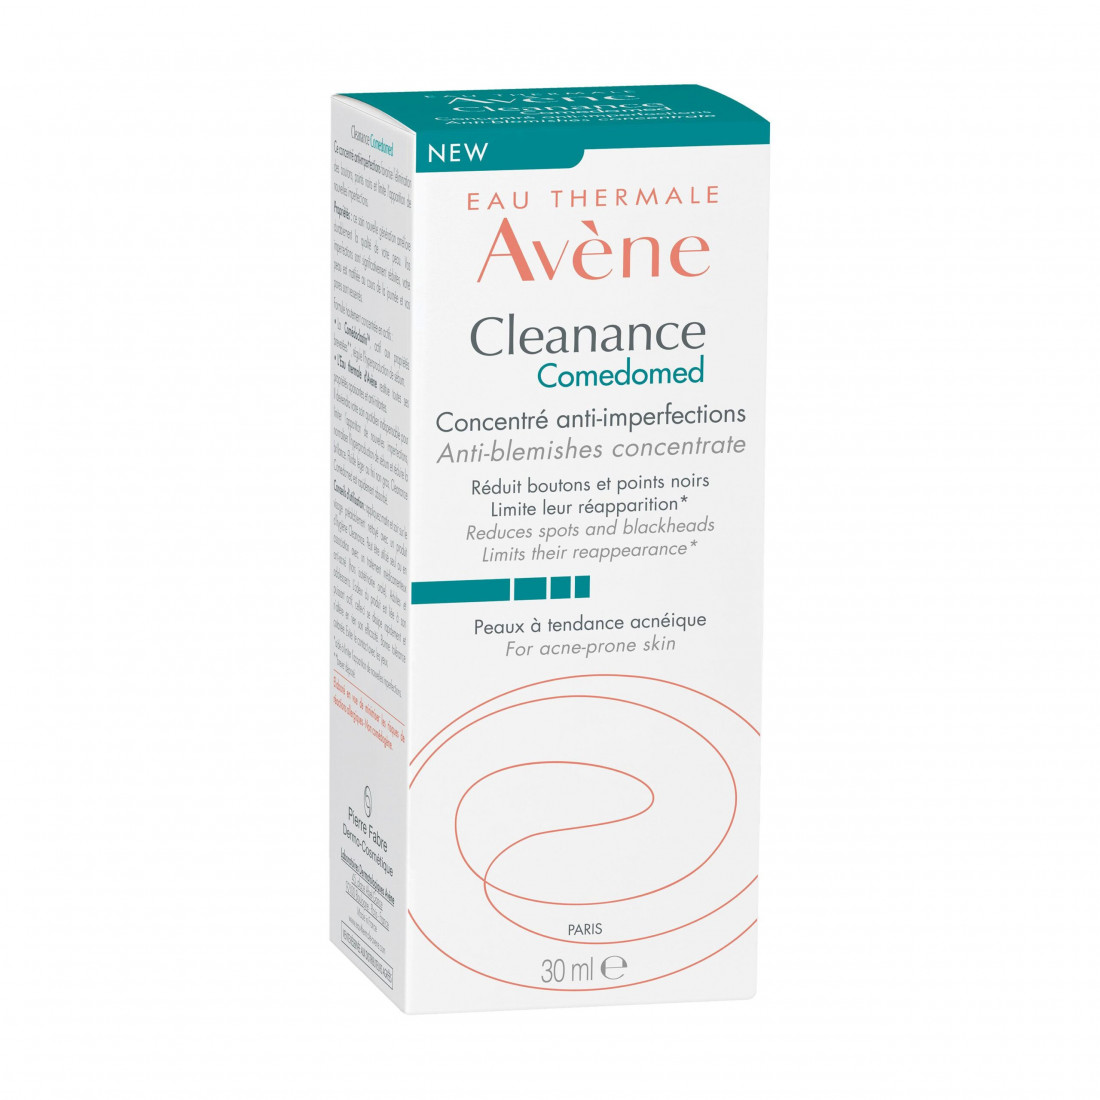 CLEANANCE COMEDOMED concentré anti-imperfections 30 ml